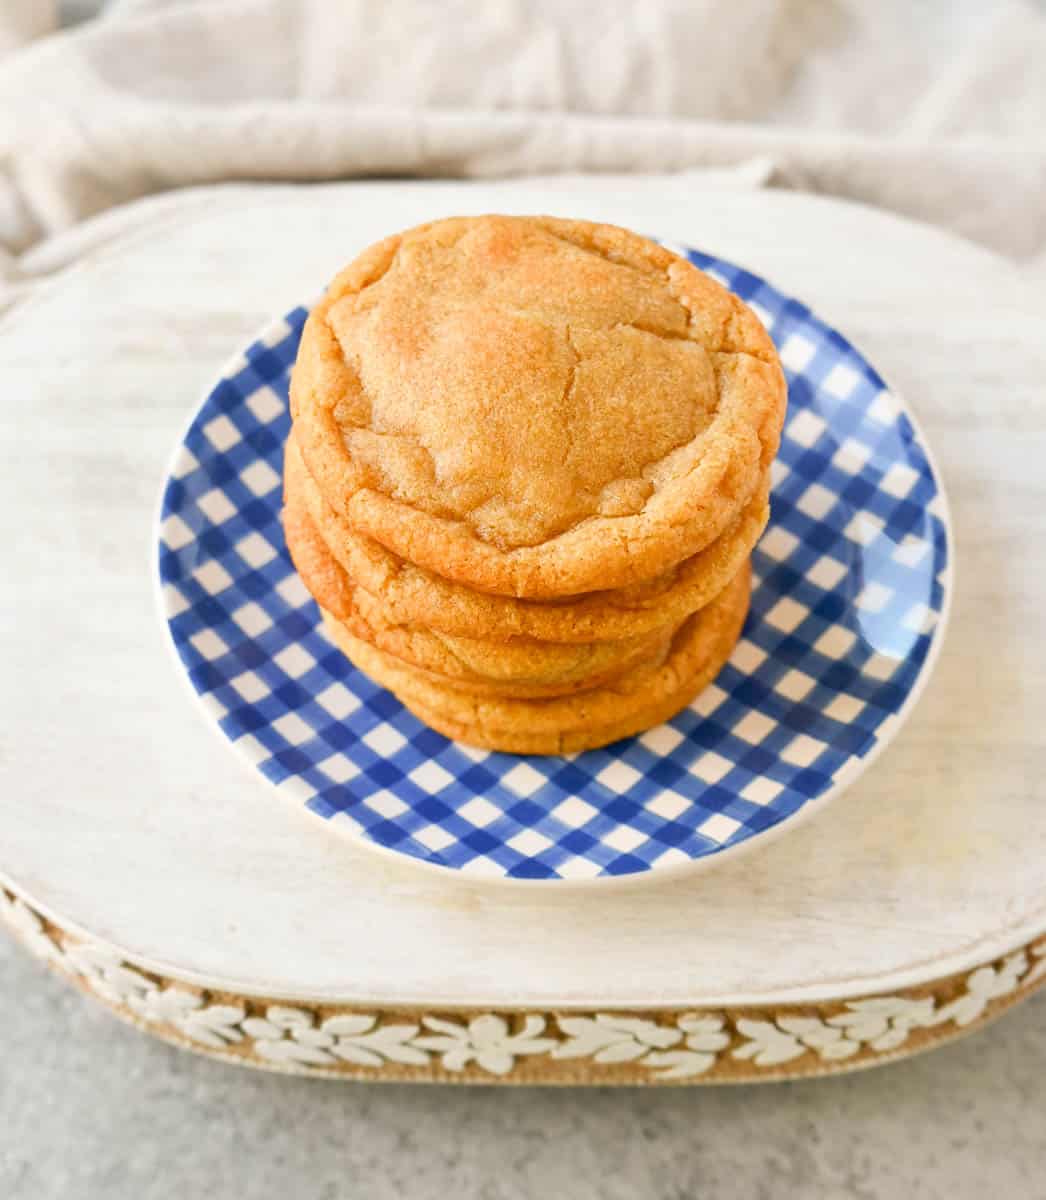 Chocolate Chipless Cookies (no chocolate chips). How to make the best brown butter chocolate chipless cookies without chocolate chips. These are rich, buttery, soft, and chewy cookies with no chocolate chips. I will share how to brown butter for perfect cookies.